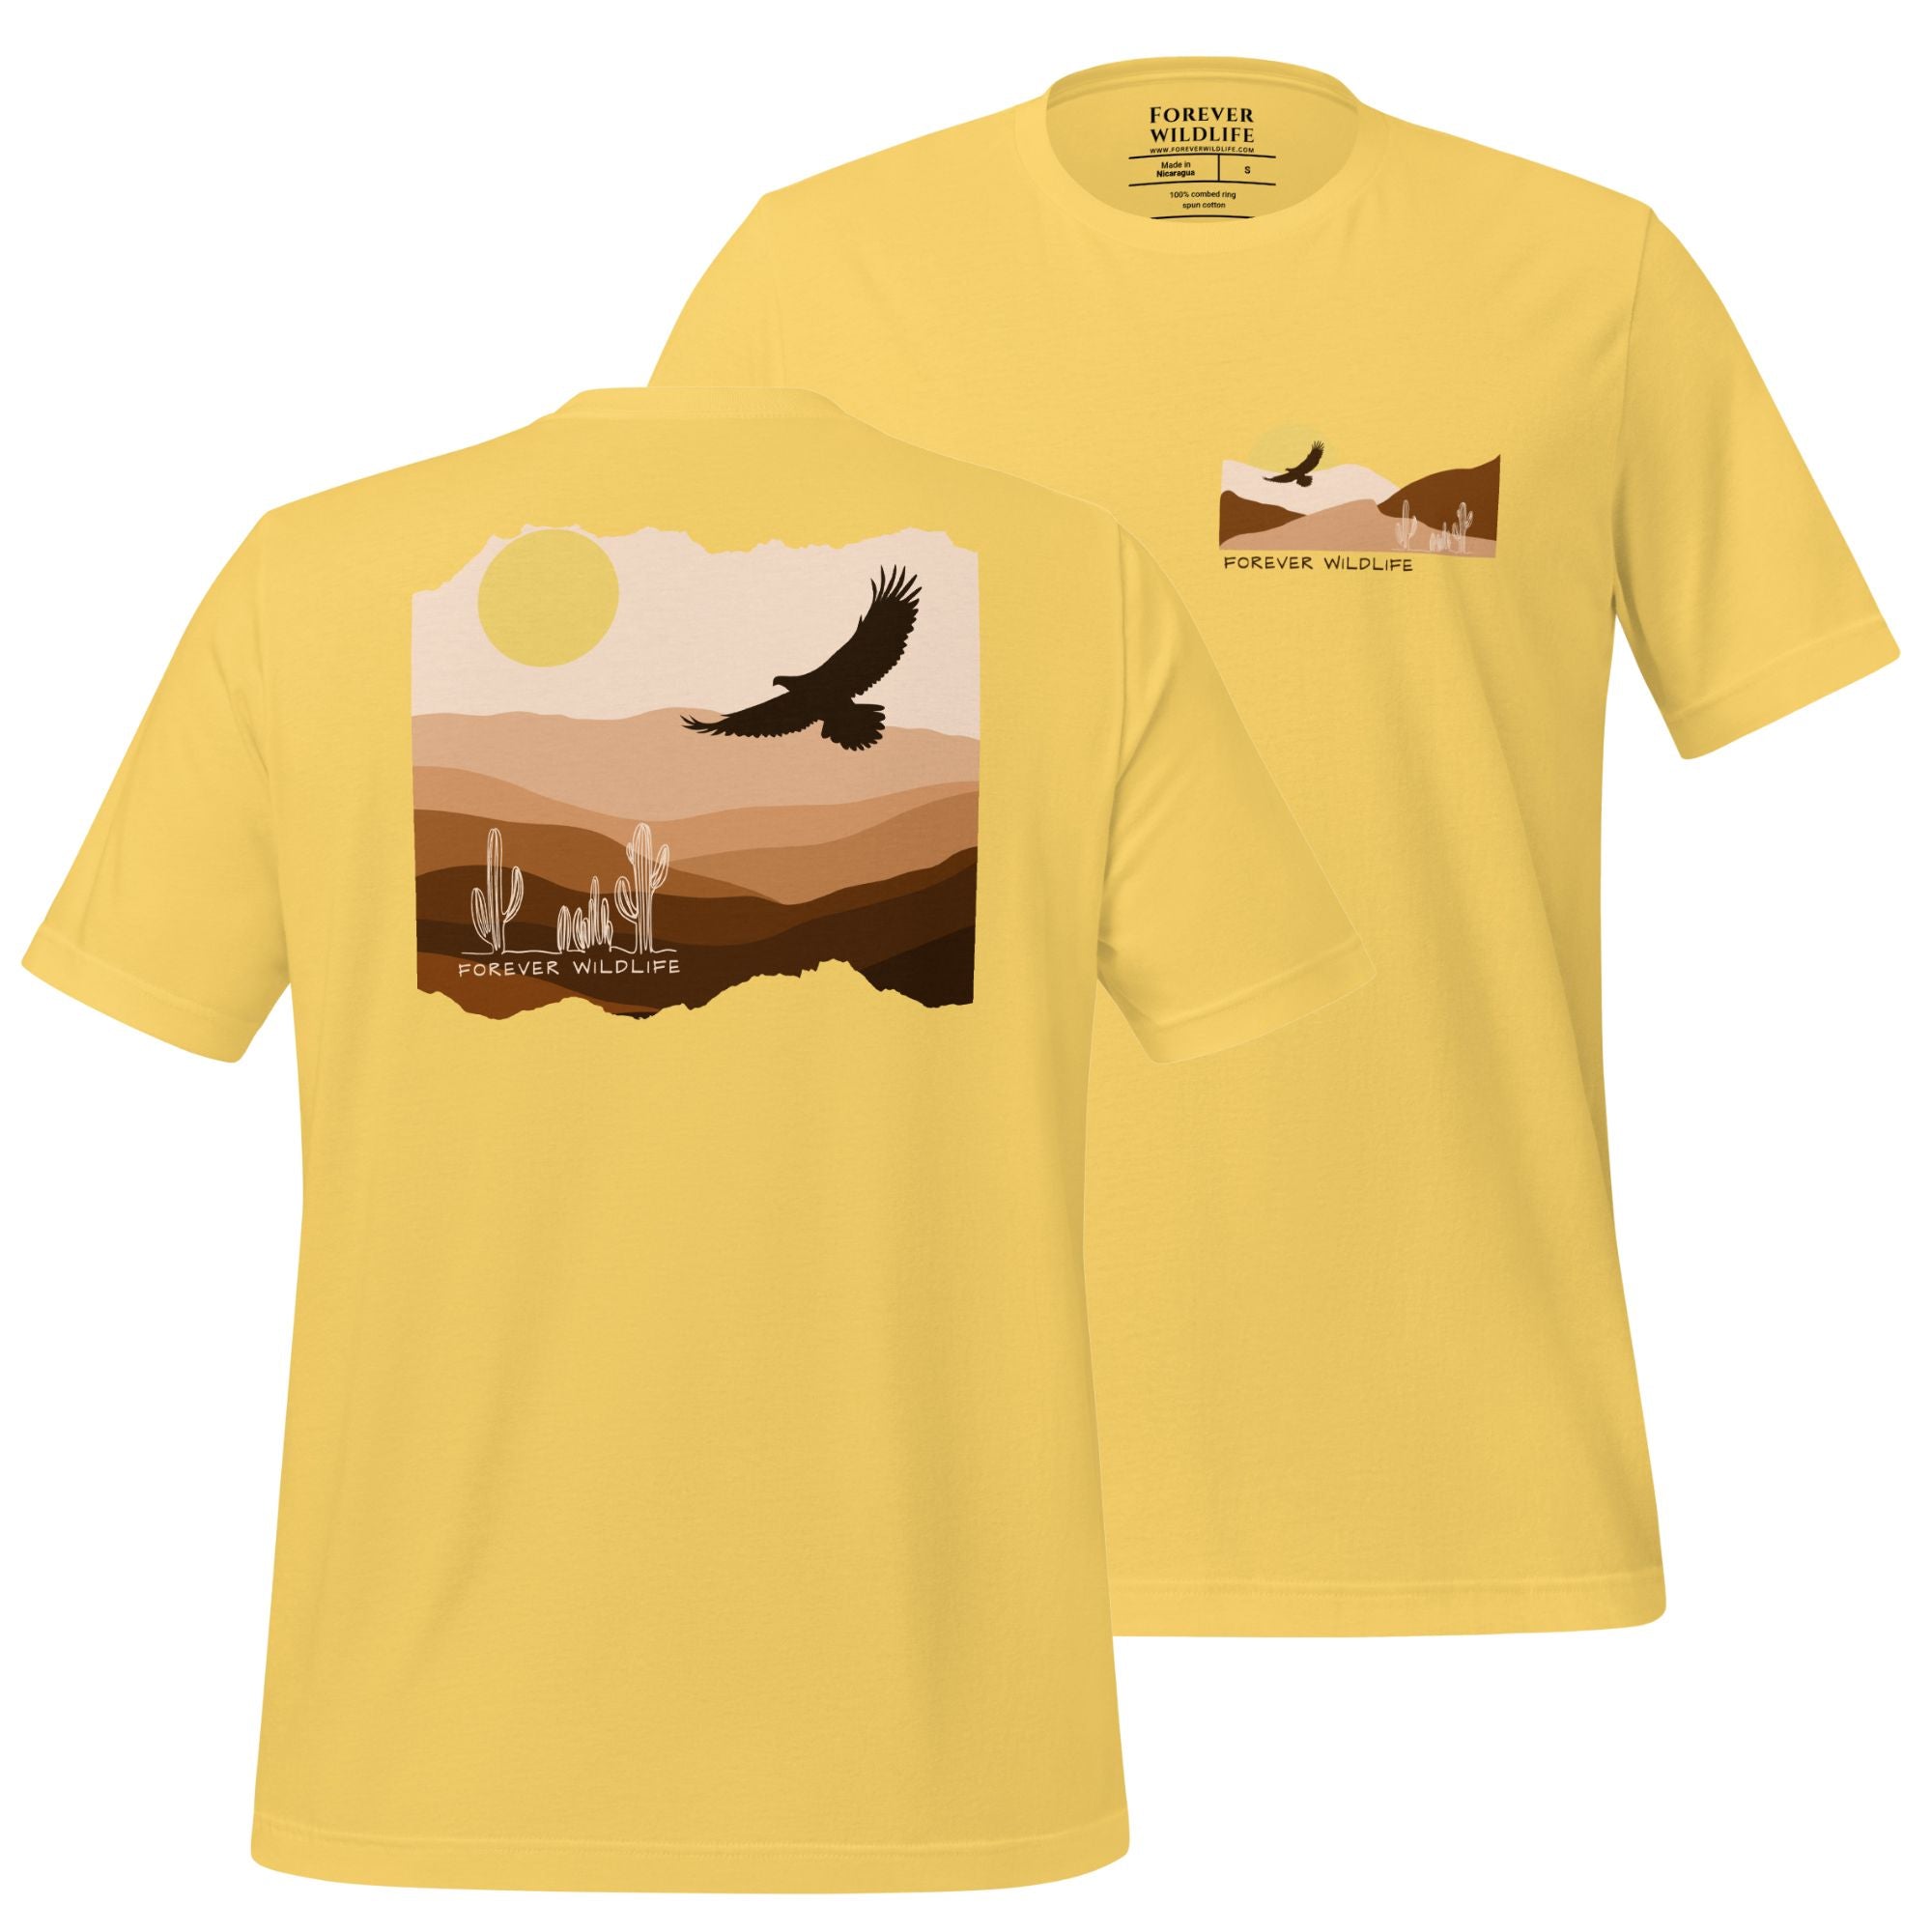 Eagle T-shirt, beautiful yellow Eagle t-shirt with eagle soaring over the desert part of Wildlife t-shirts & Clothing collection.